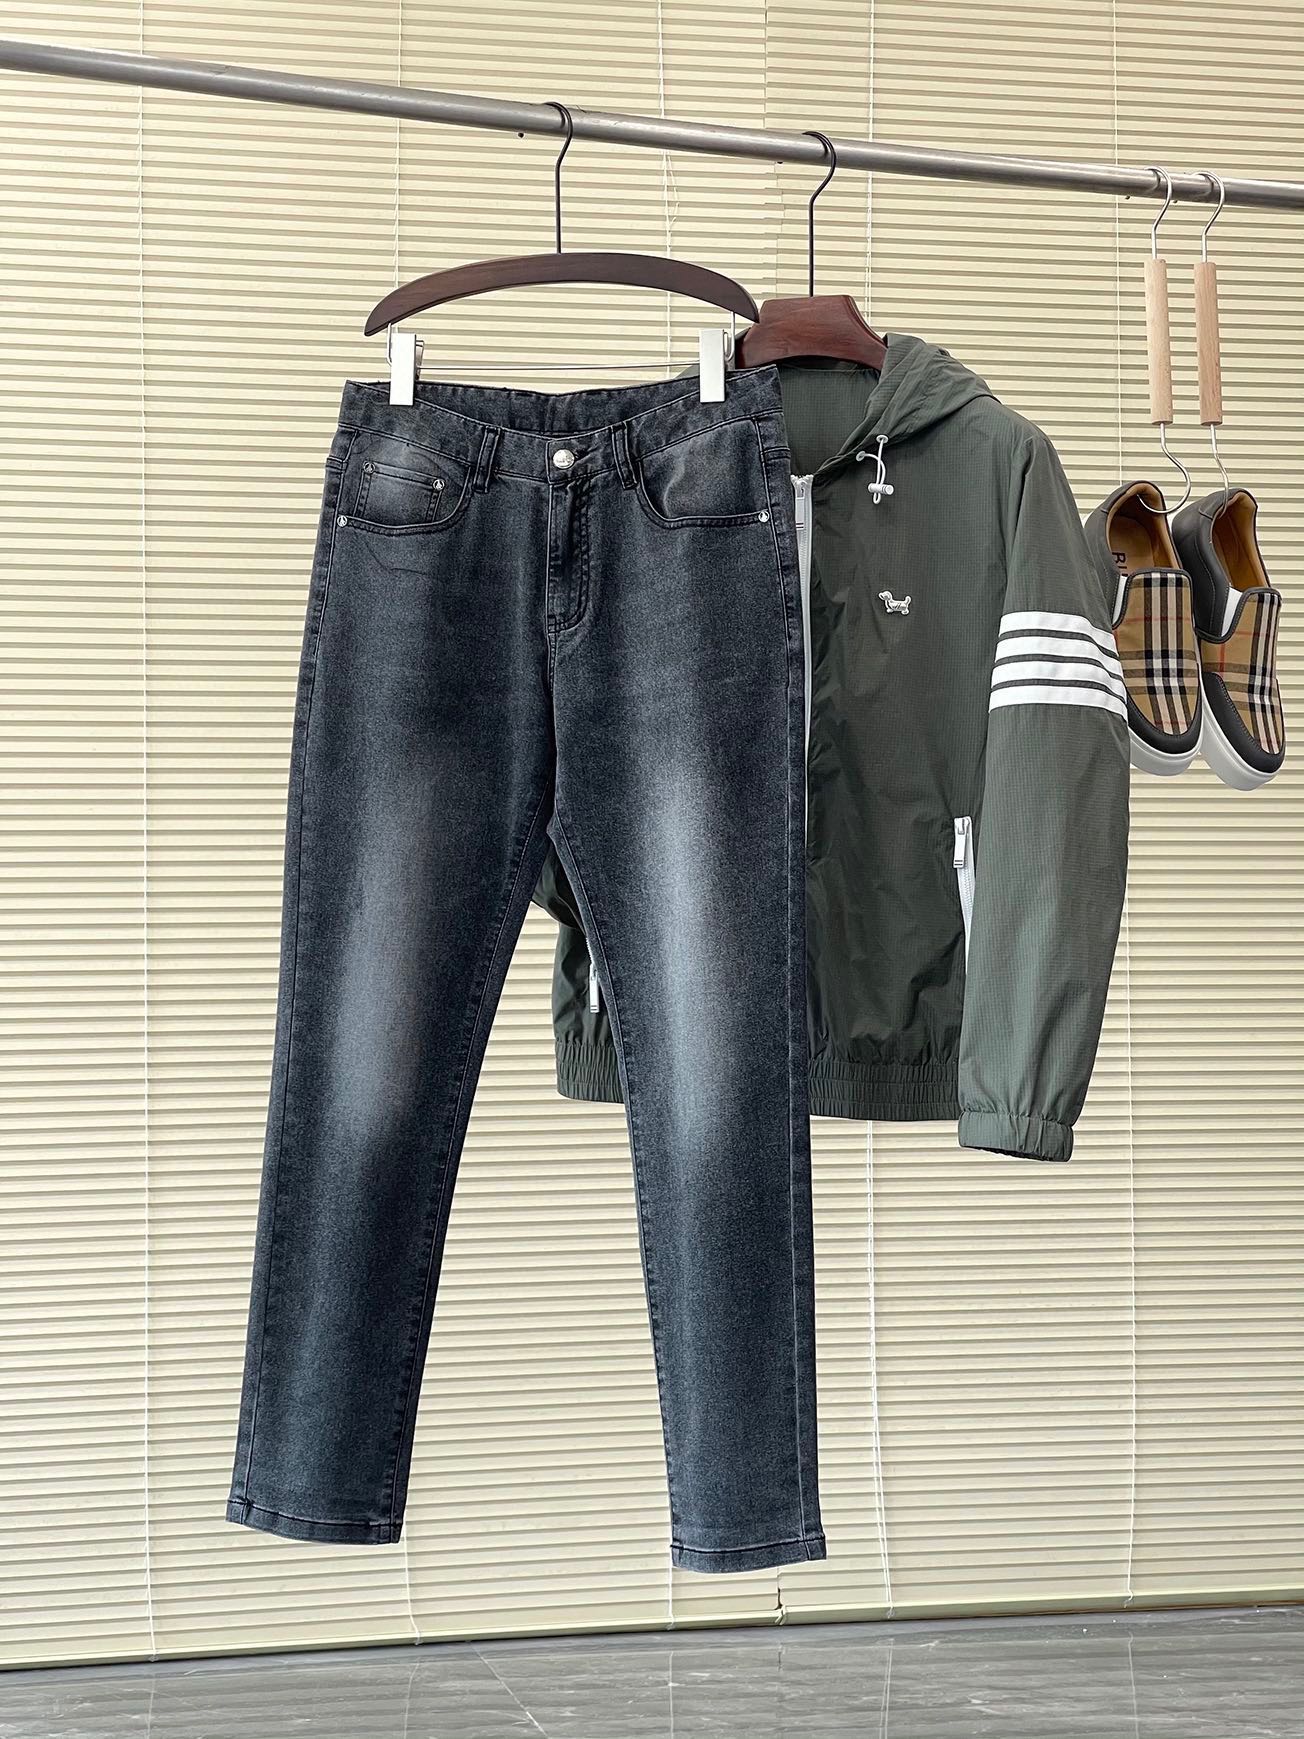 Clothing Jeans Pants & Trousers Grey Red Silver White Men Cotton Rubber Spring/Summer Collection Casual CeNz00229